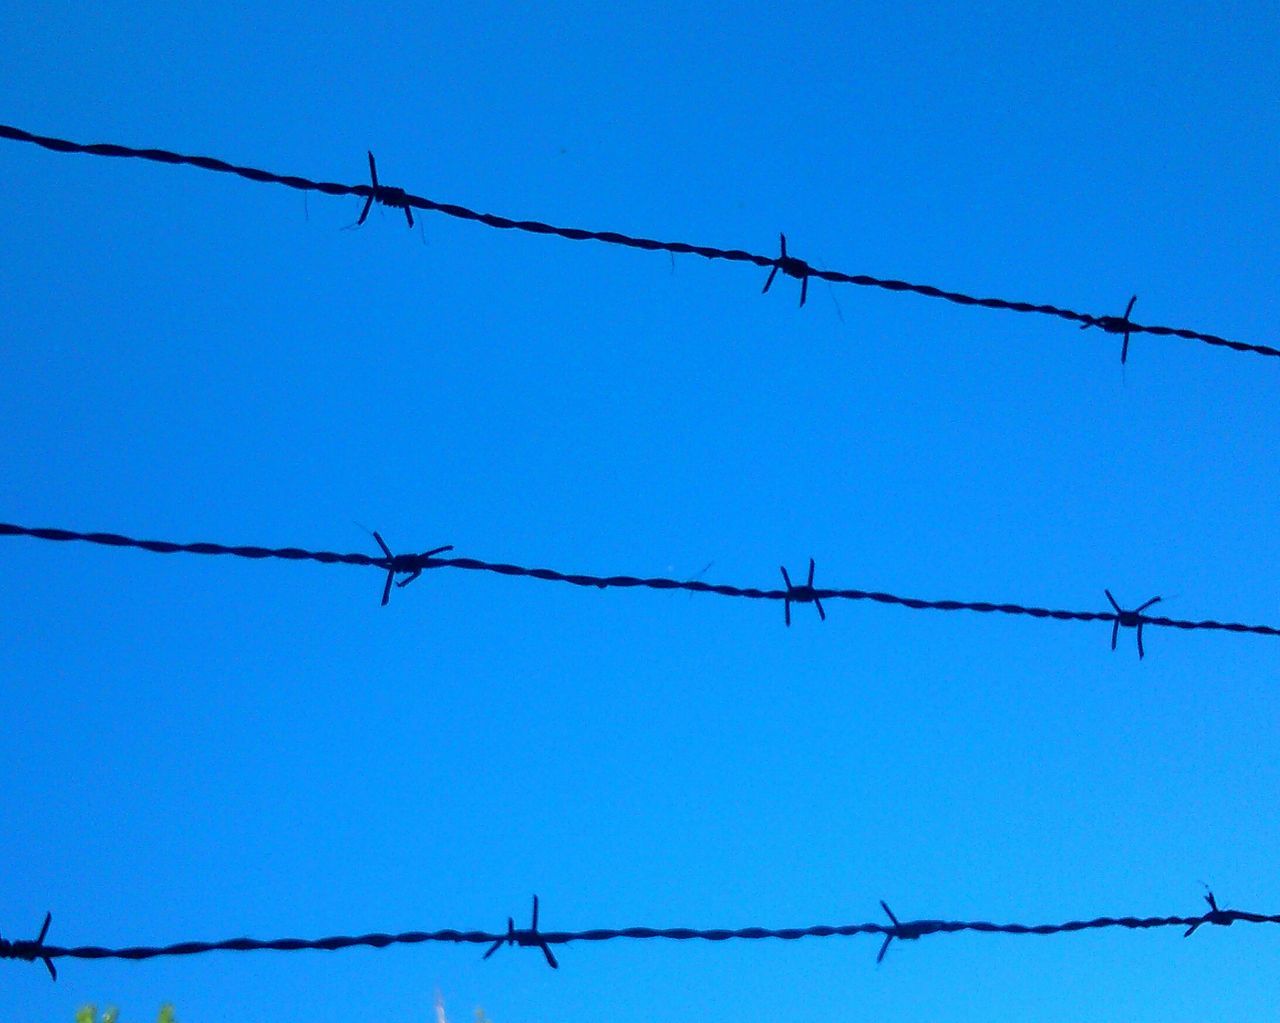 clear sky, low angle view, blue, power line, barbed wire, cable, power supply, wire, electricity pylon, electricity, fence, connection, safety, protection, copy space, fuel and power generation, security, outdoors, day, no people